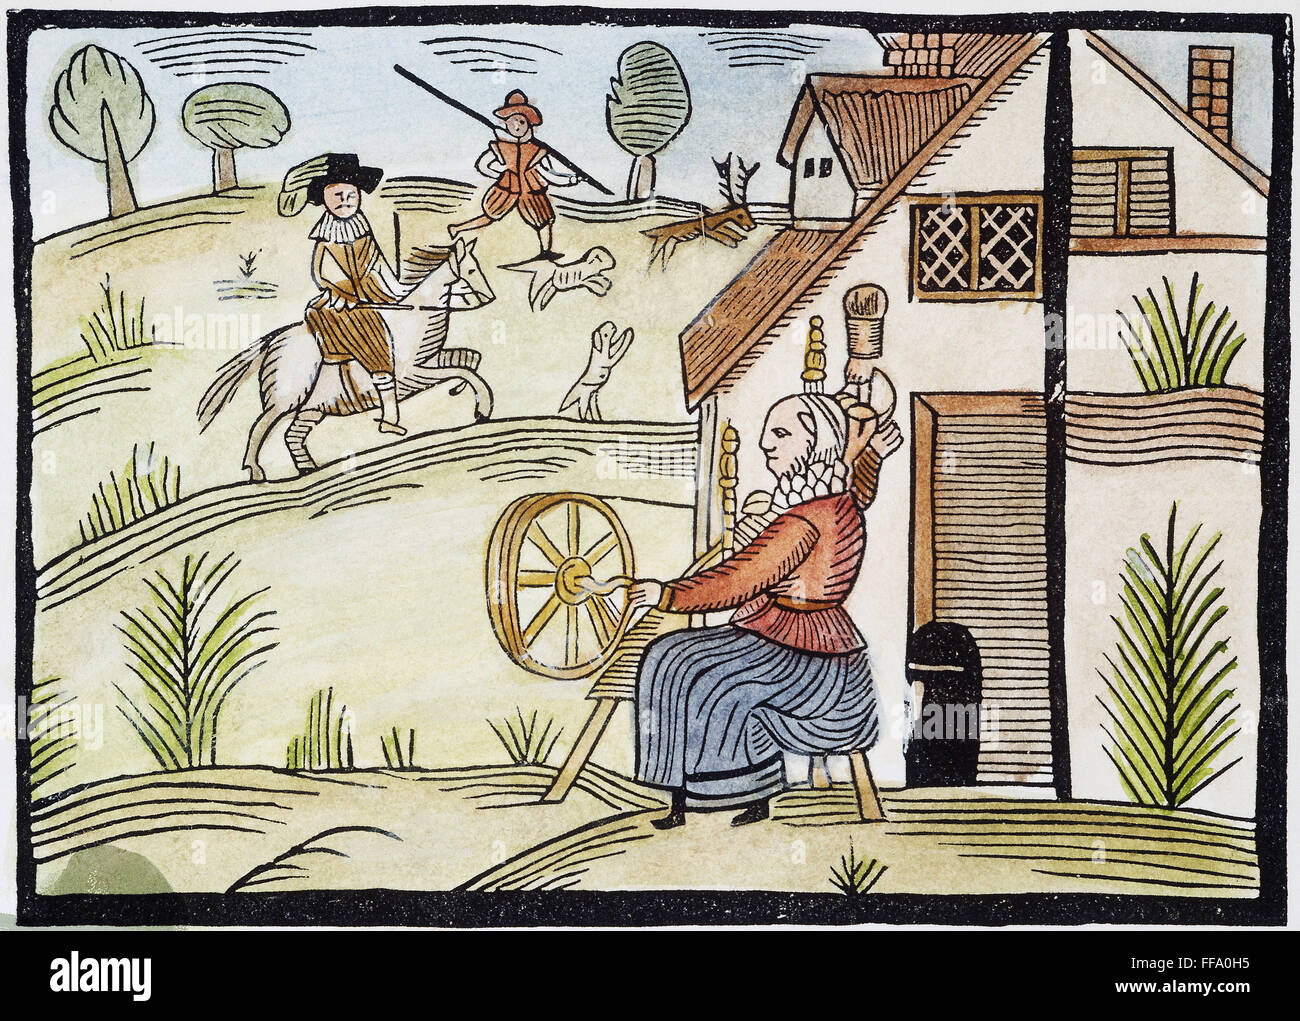 ENGLAND: DAILY LIFE. /nA housewife spins outside her cottage as a gentleman goes hunting for deer. Woodcut, English, mid-17th century. Stock Photo